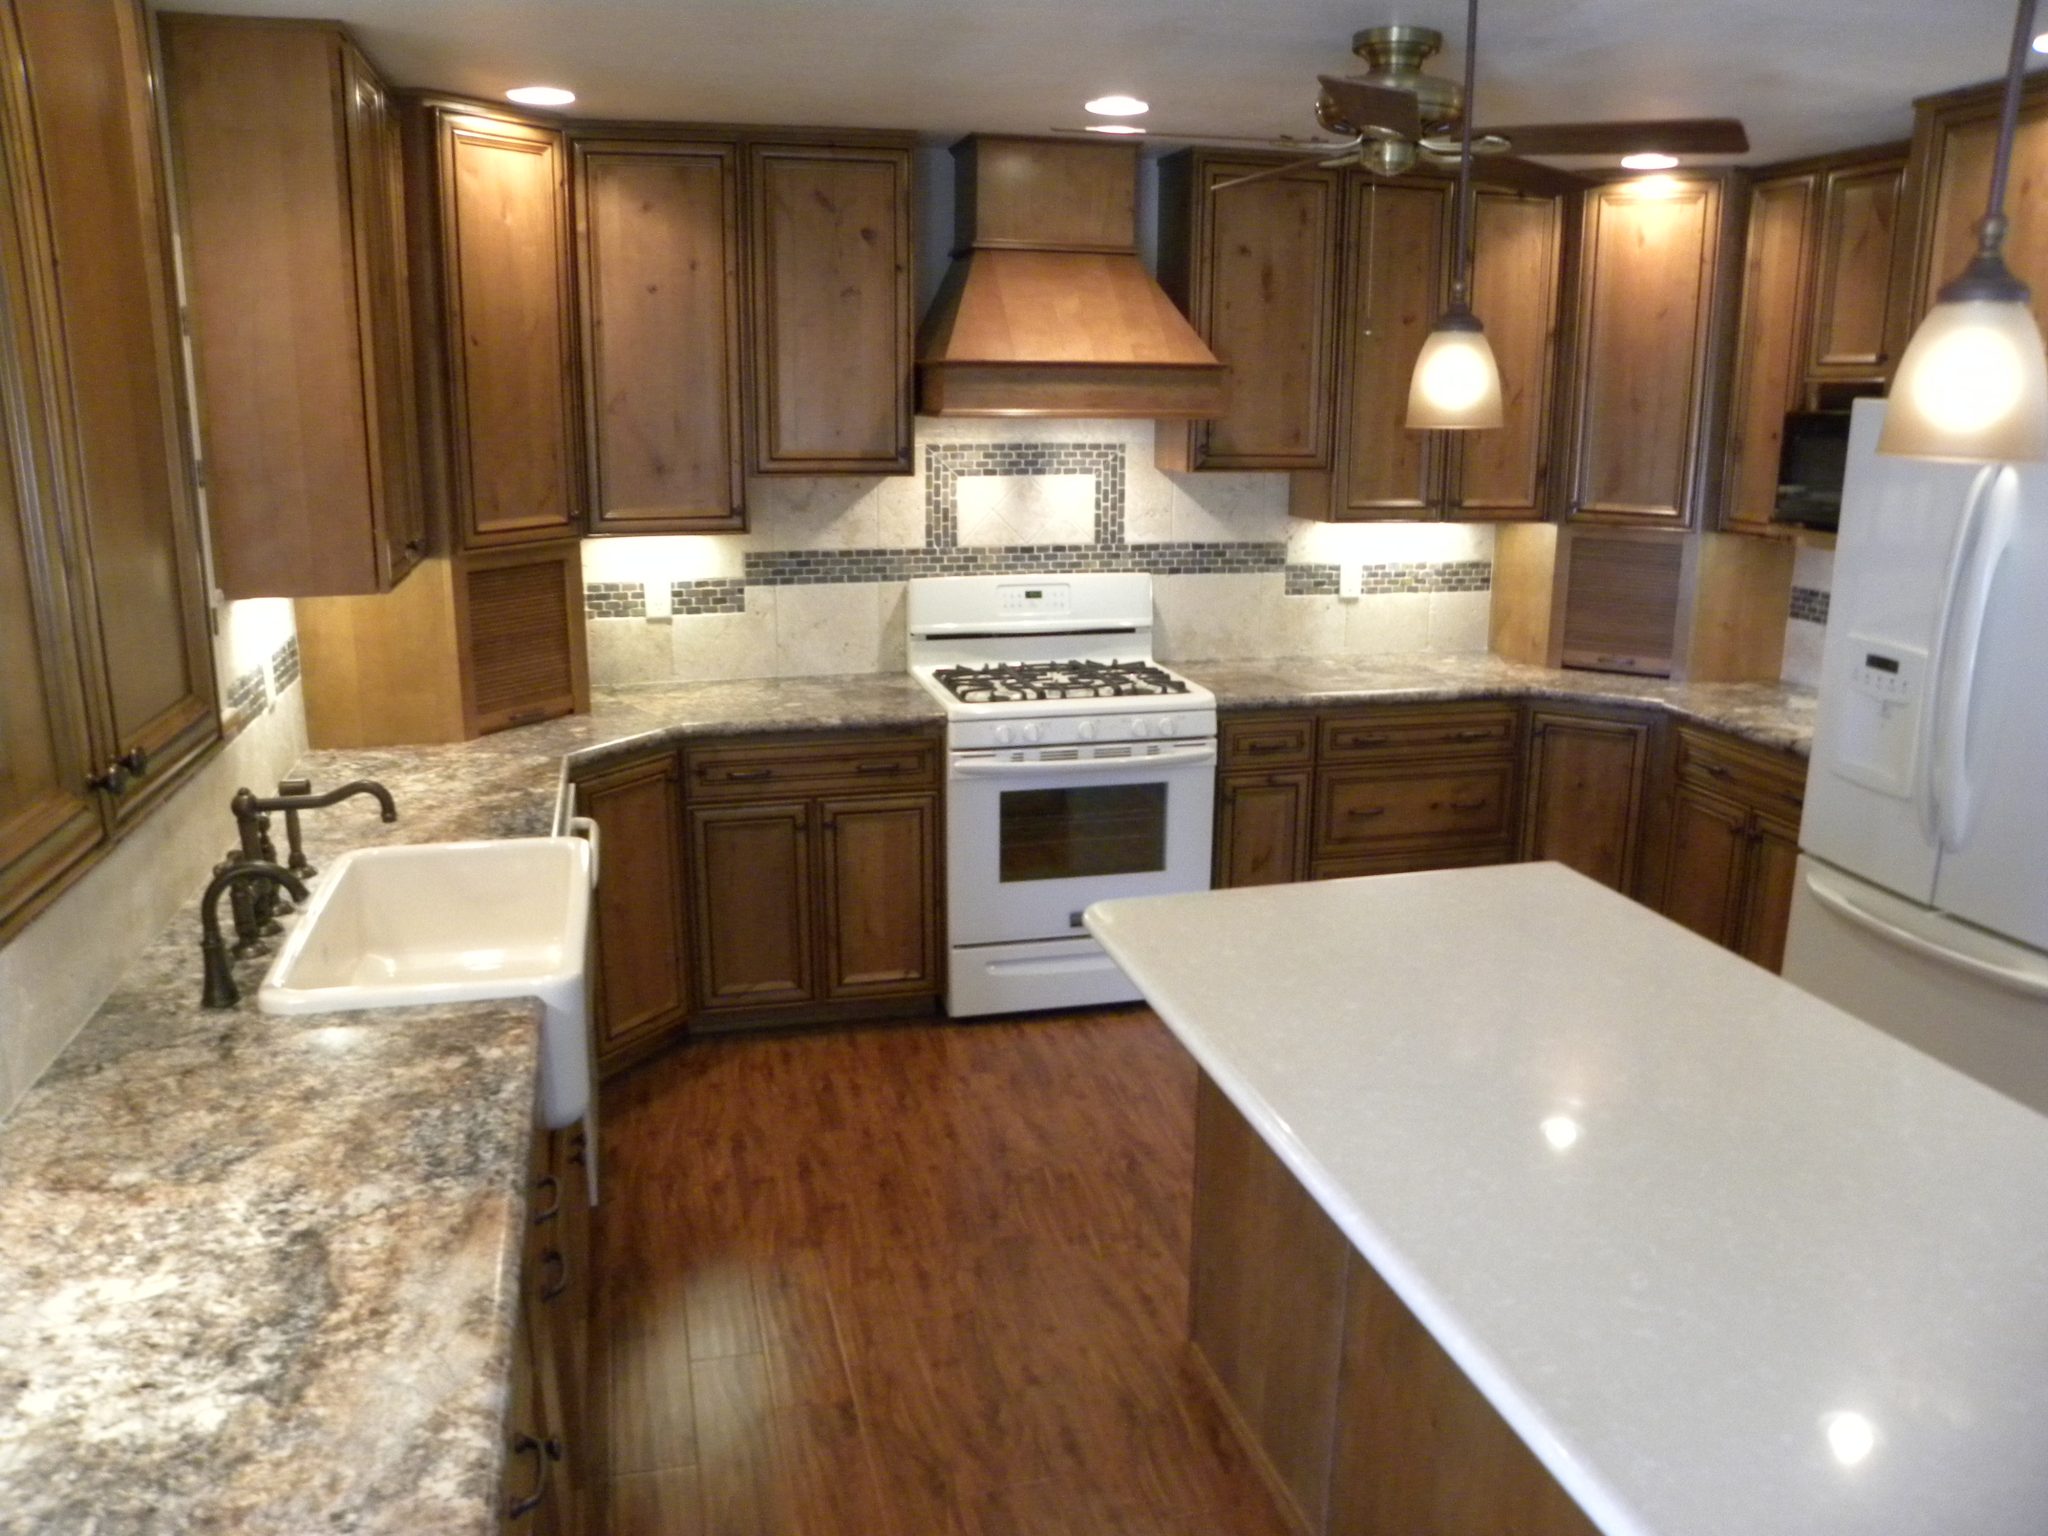 Newly remodeled custom kitchen with wooden cabinets and granite countertops